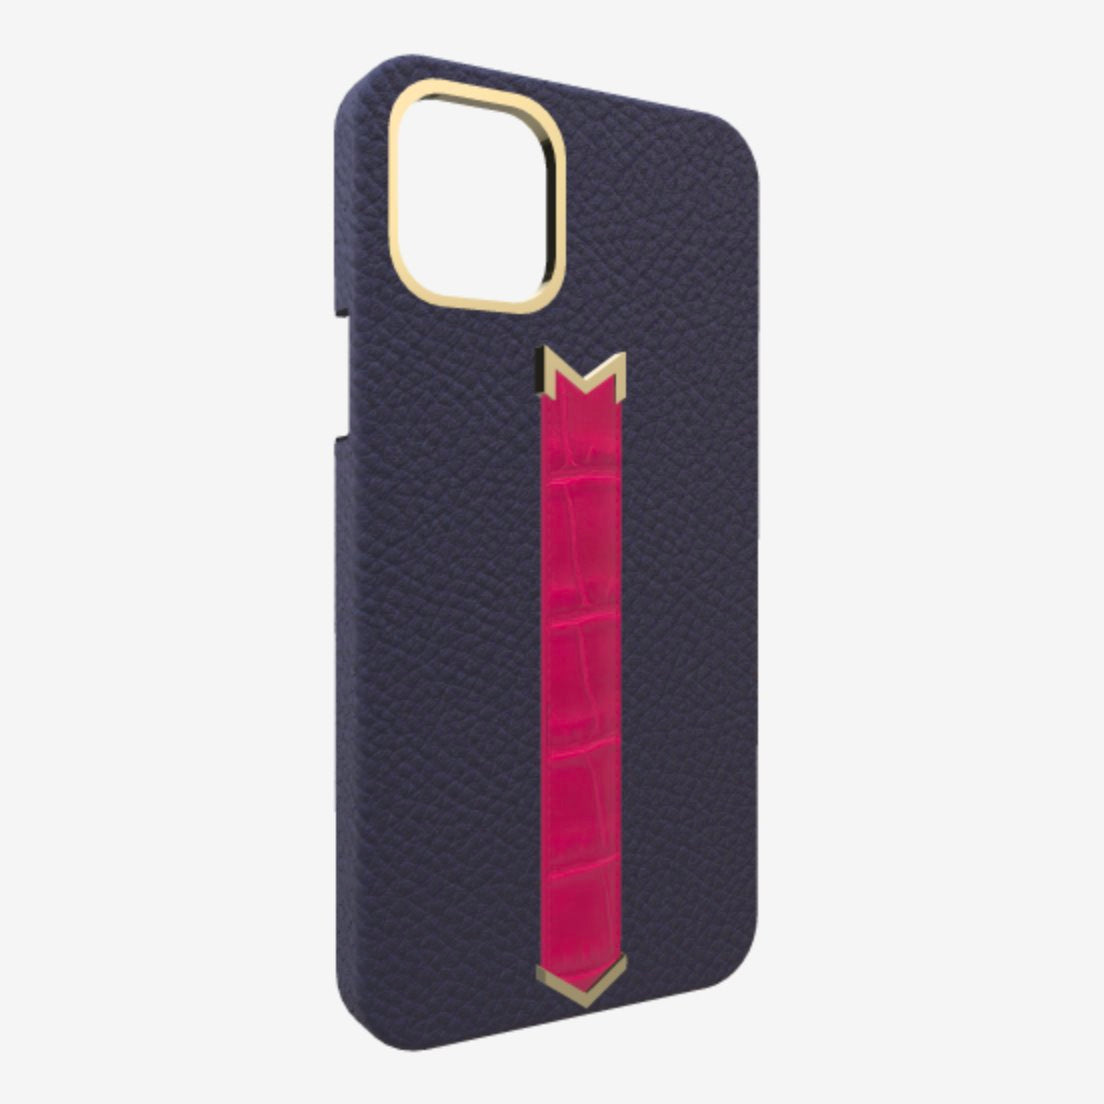 Gold Finger Strap Case for iPhone 13 Pro Max in Genuine Calfskin and Alligator Navy Blue Fuchsia Party 